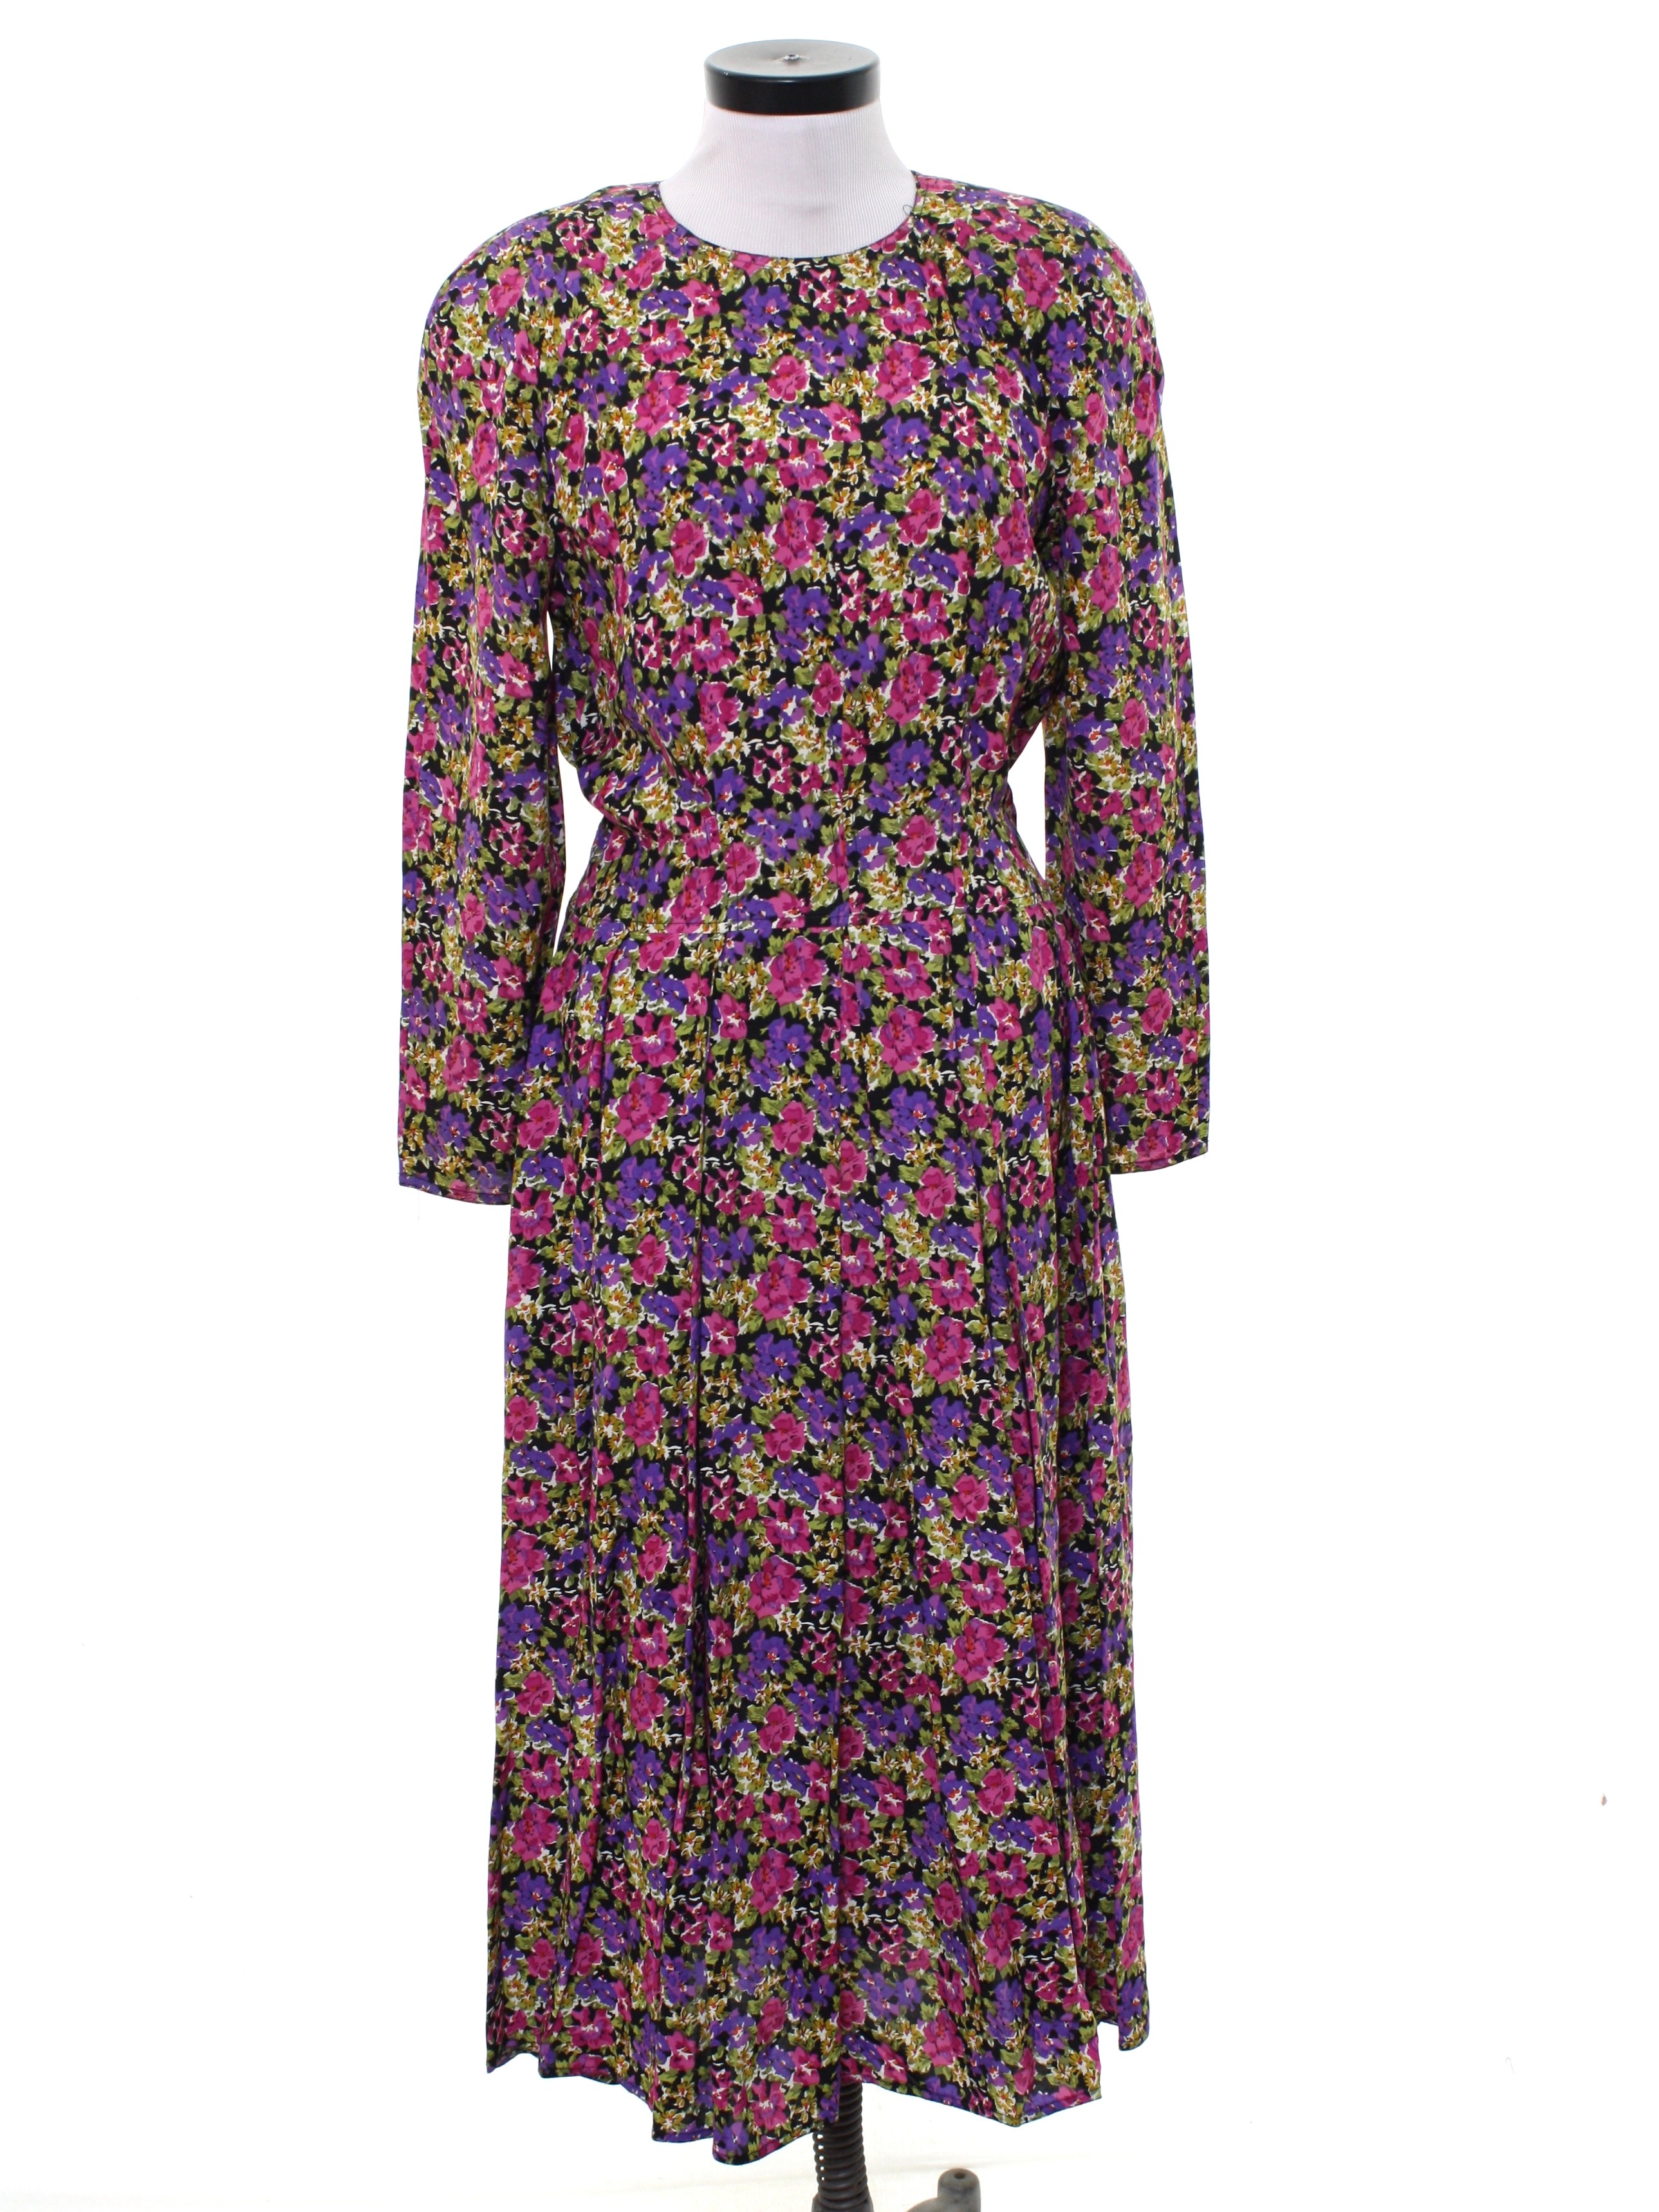 Vintage Eighties Dress: 80s -No Label- Womens violet and purple rayon ...